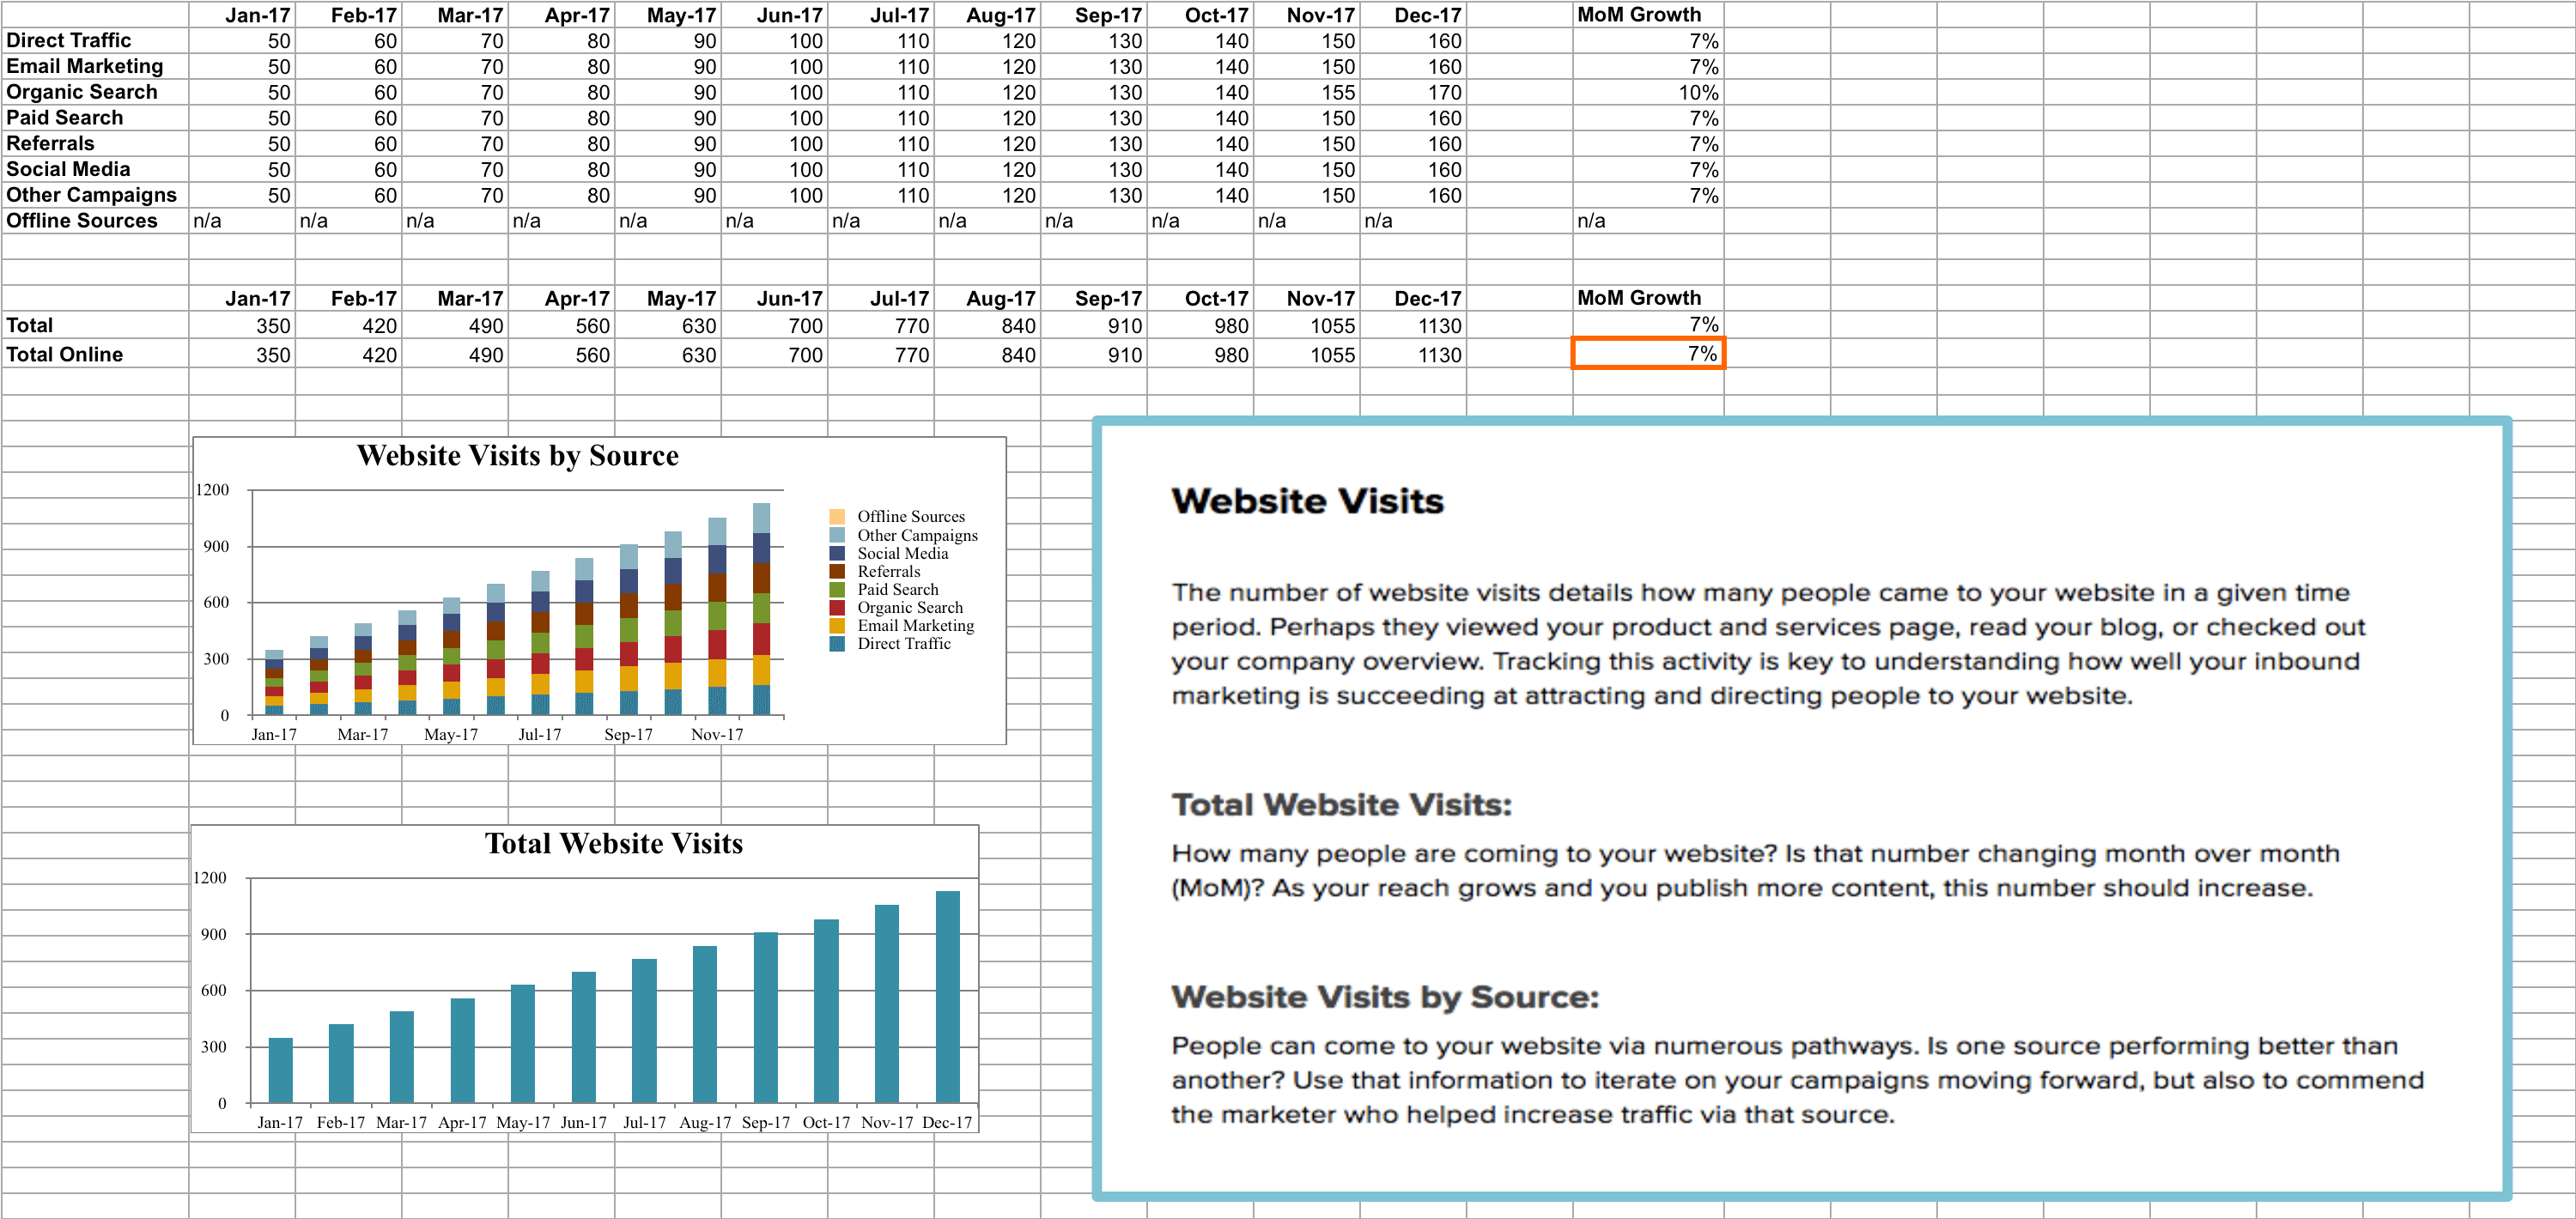 how to write a good data analysis report